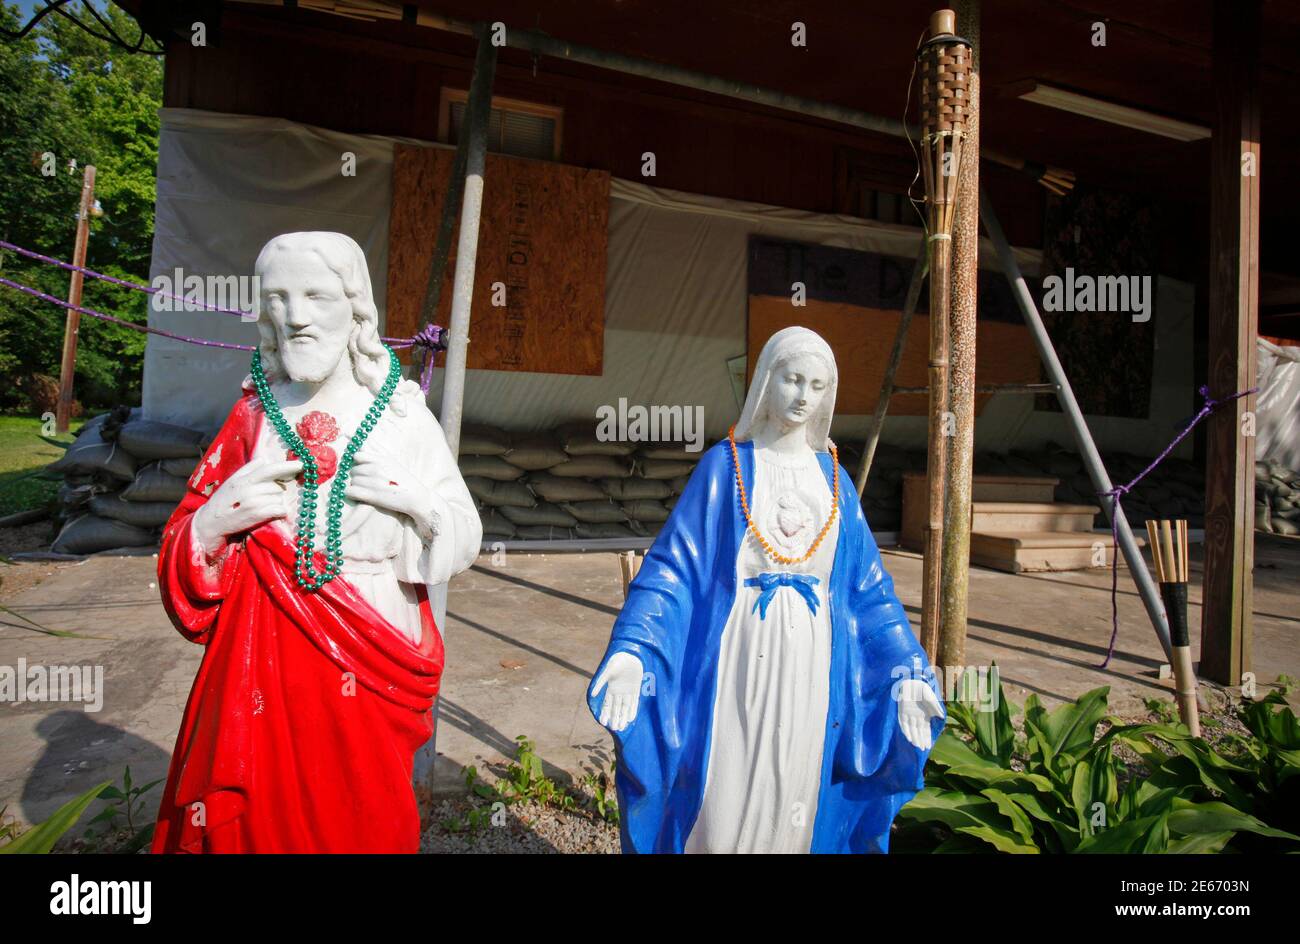 Religious statues sit in front of a sandbagged, empty house in the Happy Town section of Butte LaRose, Louisiana May 19, 2011. The town, within the Atchafalaya Basin, is expected to flood up to several feet in coming days. REUTERS/Lee Celano (UNITED STATES - Tags: ENVIRONMENT RELIGION) Stock Photo